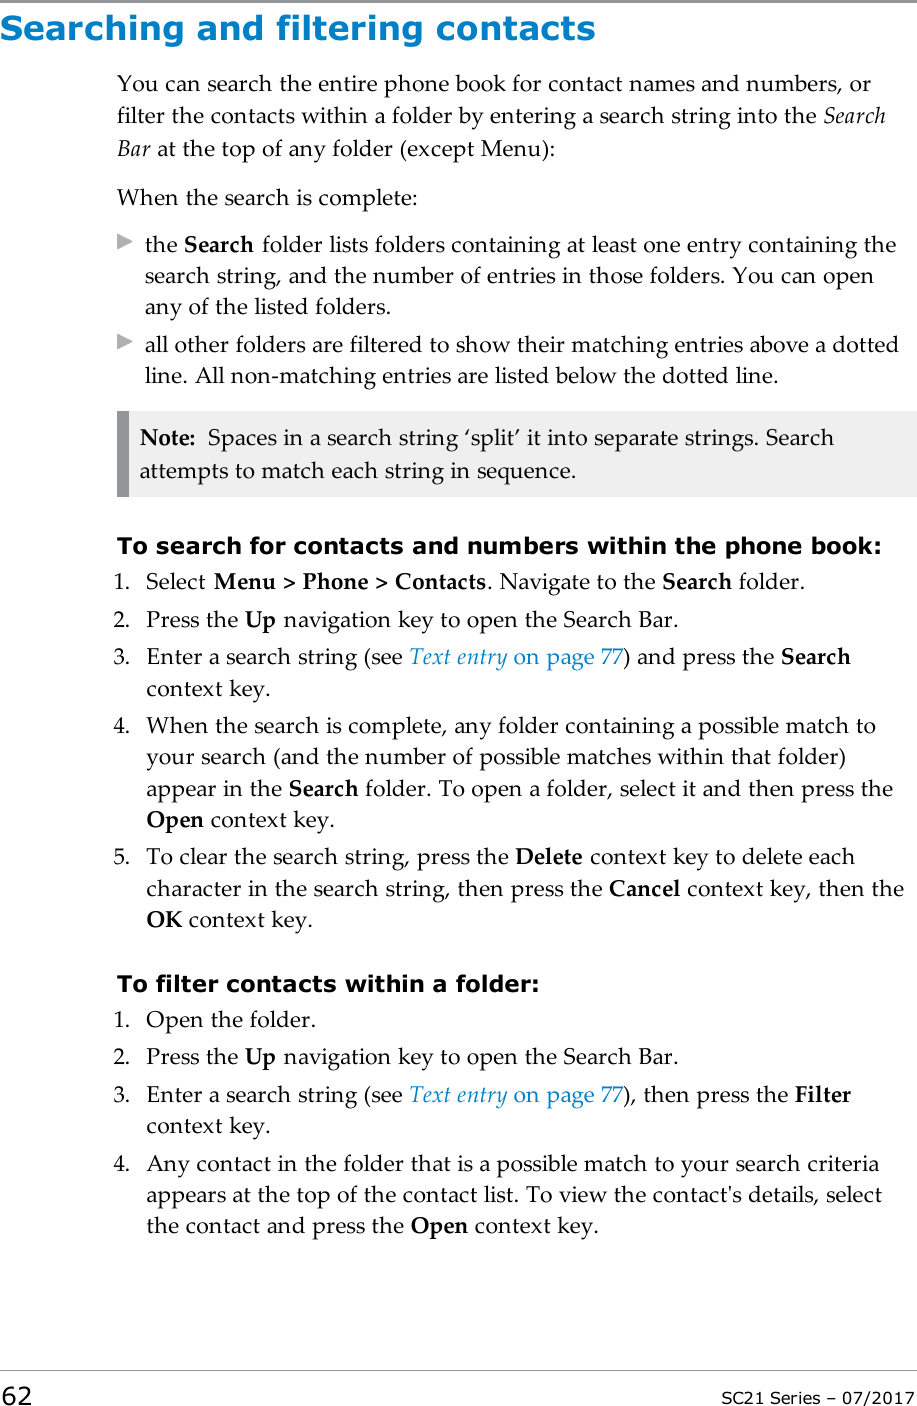 Searching and filtering contactsYou can search the entire phone book for contact names and numbers, orfilter the contacts within a folder by entering a search string into the SearchBar at the top of any folder (except Menu):When the search is complete:the Search folder lists folders containing at least one entry containing thesearch string, and the number of entries in those folders. You can openany of the listed folders.all other folders are filtered to show their matching entries above a dottedline. All non-matching entries are listed below the dotted line.Note: Spaces in a search string ‘split’ it into separate strings. Searchattempts to match each string in sequence.To search for contacts and numbers within the phone book:1. Select Menu &gt; Phone &gt; Contacts. Navigate to the Search folder.2. Press the Up navigation key to open the Search Bar.3. Enter a search string (see Text entry on page77) and press the Searchcontext key.4. When the search is complete, any folder containing a possible match toyour search (and the number of possible matches within that folder)appear in the Search folder. To open a folder, select it and then press theOpen context key.5. To clear the search string, press the Delete context key to delete eachcharacter in the search string, then press the Cancel context key, then theOK context key.To filter contacts within a folder:1. Open the folder.2. Press the Up navigation key to open the Search Bar.3. Enter a search string (see Text entry on page77), then press the Filtercontext key.4. Any contact in the folder that is a possible match to your search criteriaappears at the top of the contact list. To view the contact&apos;s details, selectthe contact and press the Open context key.62 SC21 Series – 07/2017